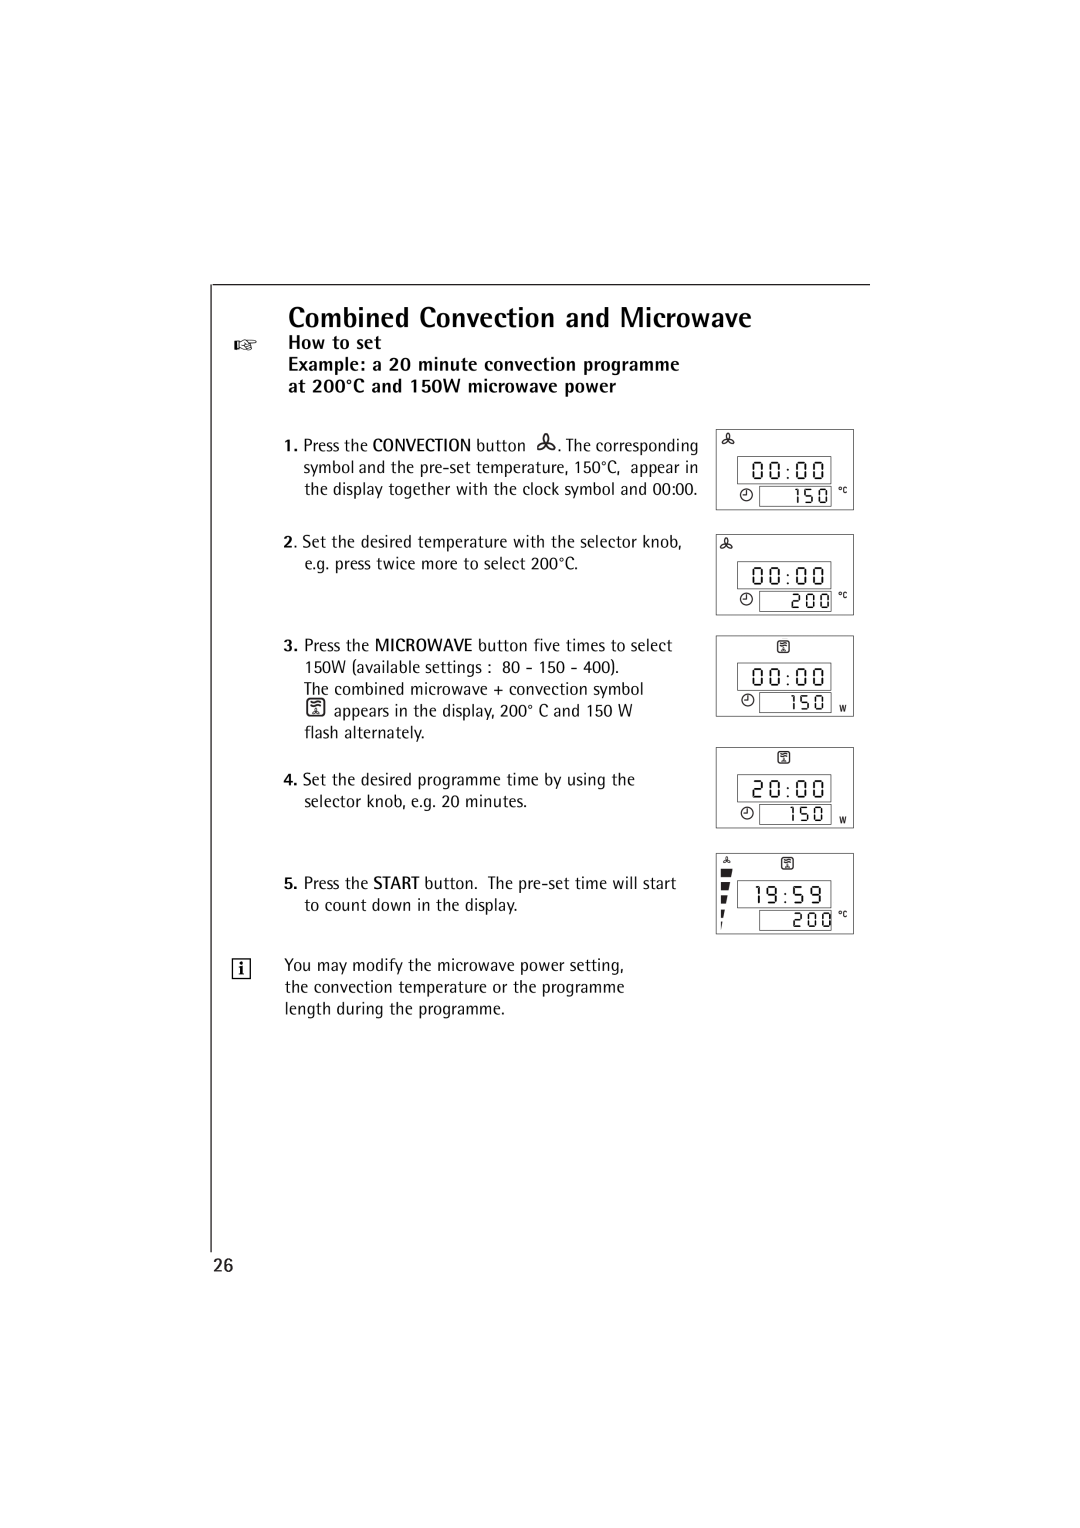 AEG MCC 663 instruction manual Combined Convection and Microwave, 2 0 0, How to set 